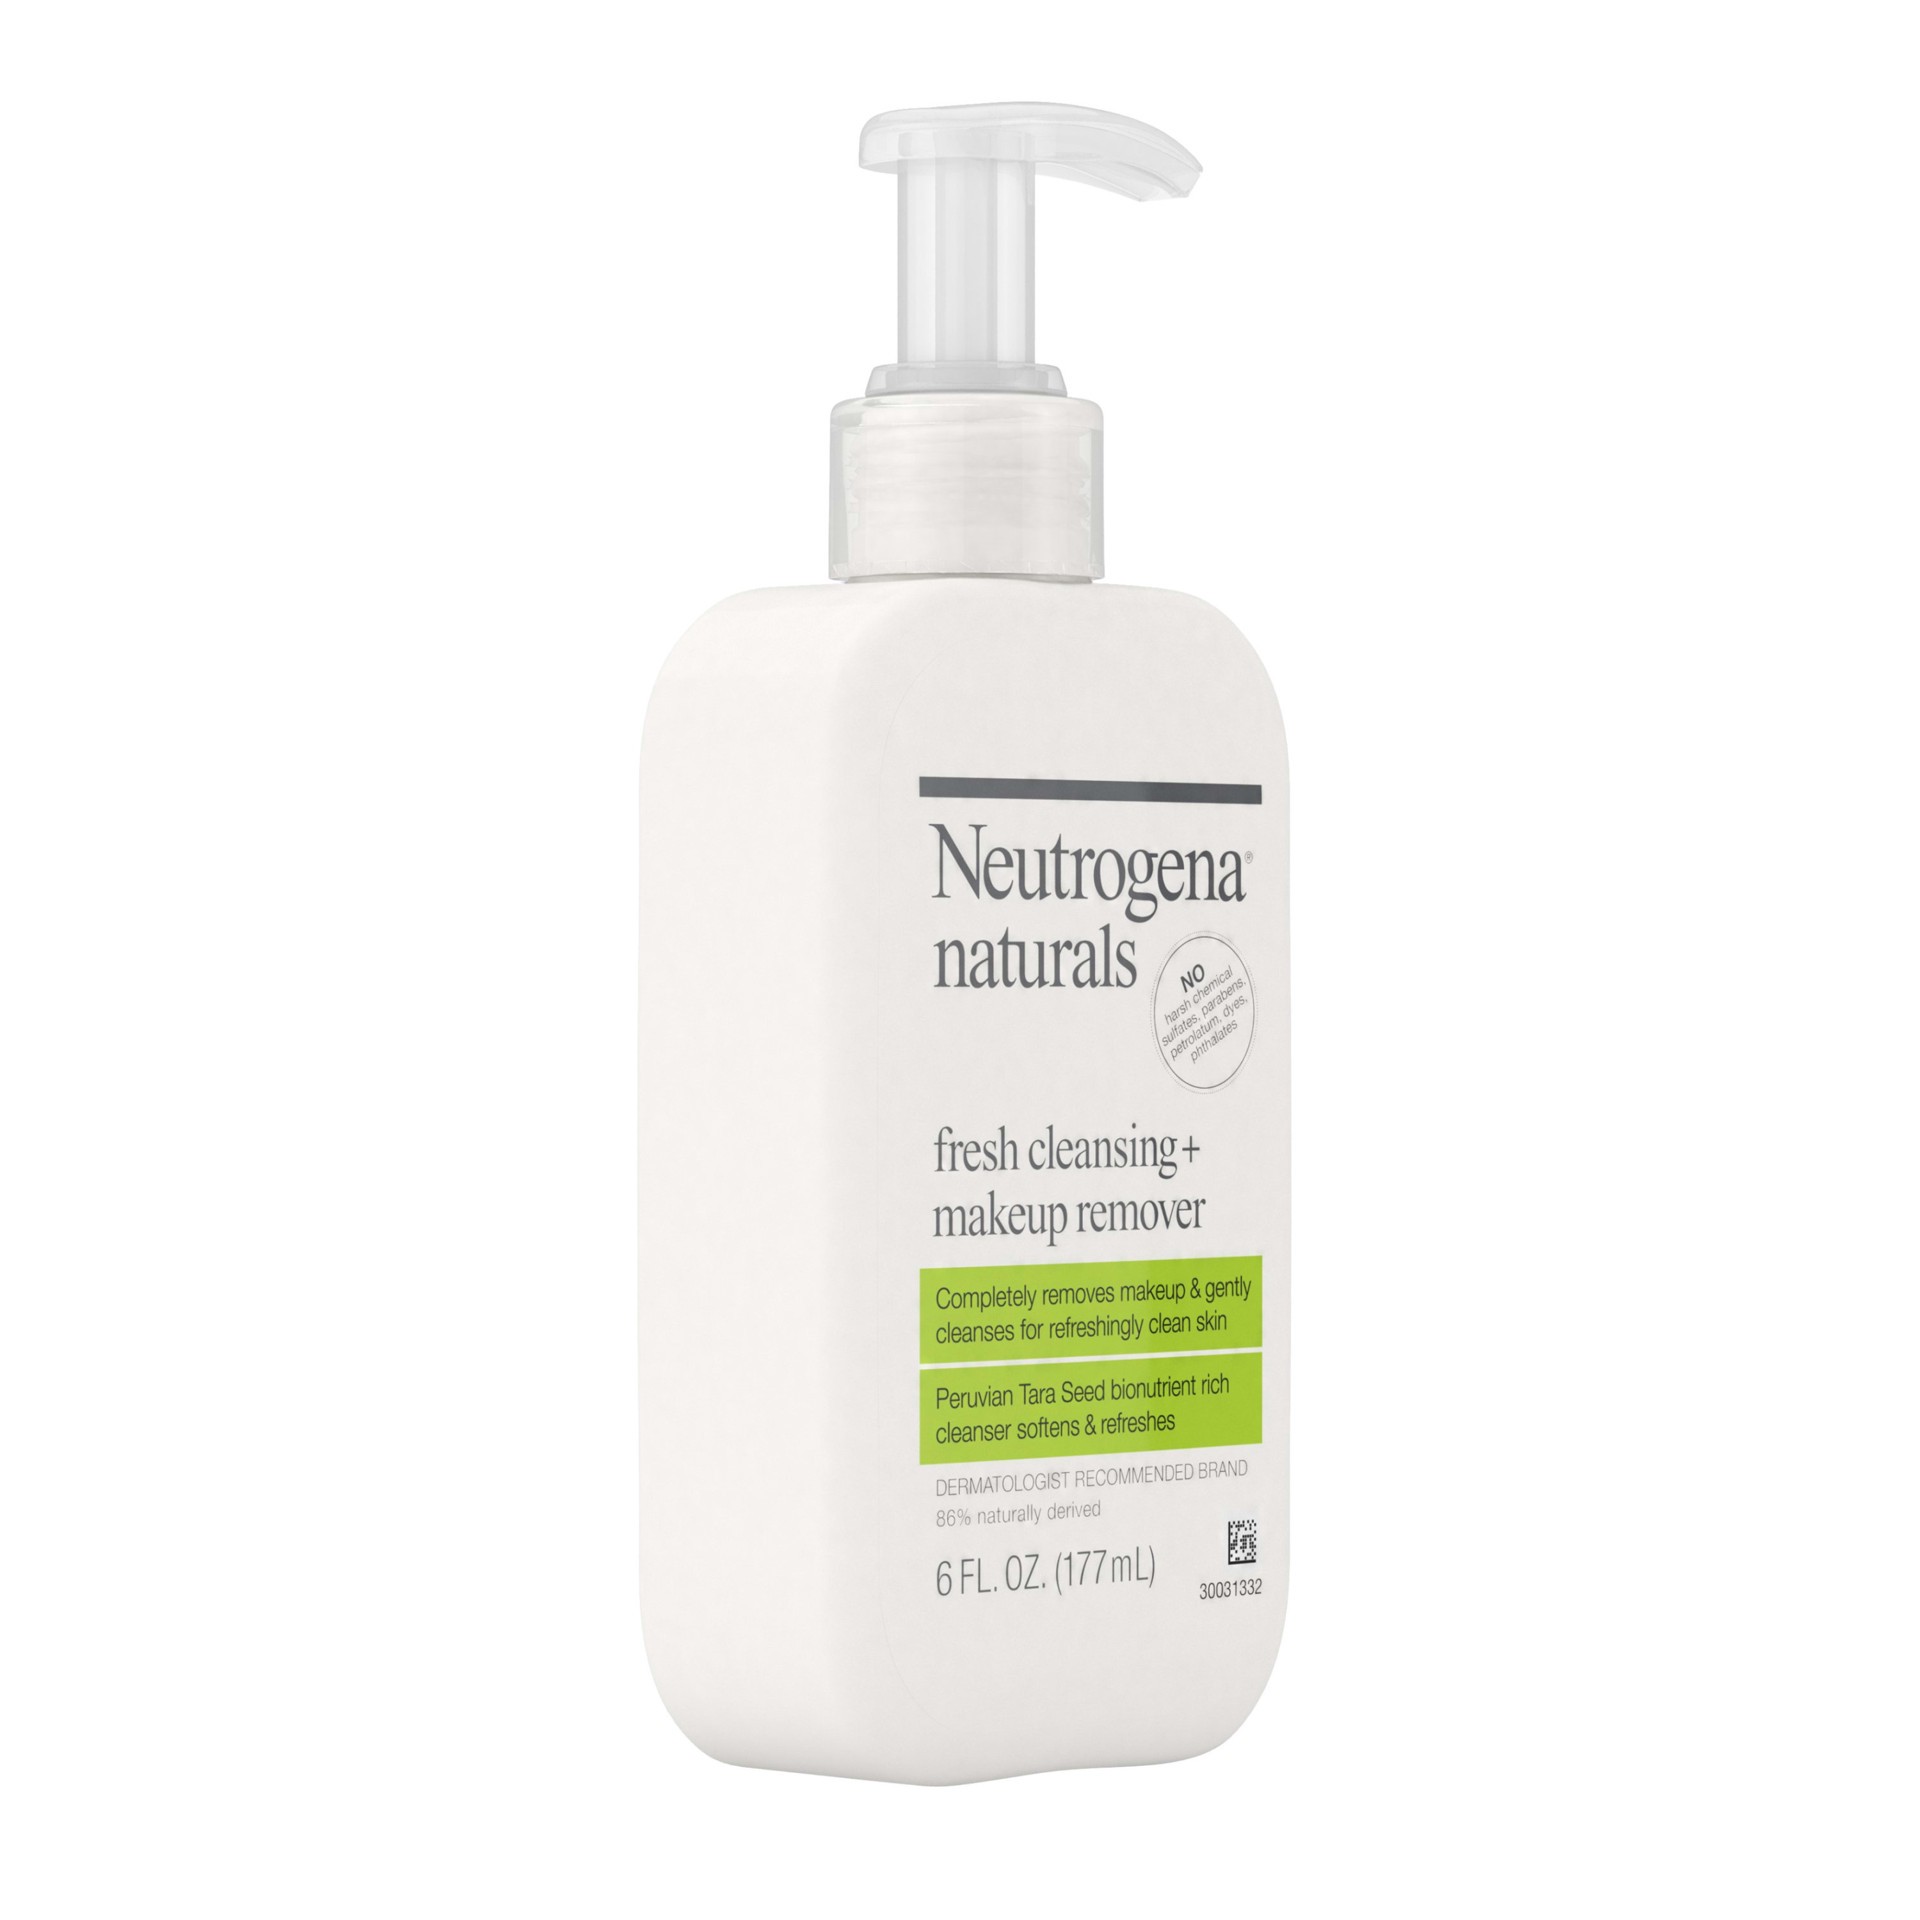 slide 2 of 5, Neutrogena Naturals Fresh Cleansing Daily Face Wash + Makeup Remover with Naturally-Derived Peruvian Tara Seed, Hypoallergenic, Non-Comedogenic & Sulfate-, Paraben- & Phthalate-Free, 6 fl. oz, 6 fl oz